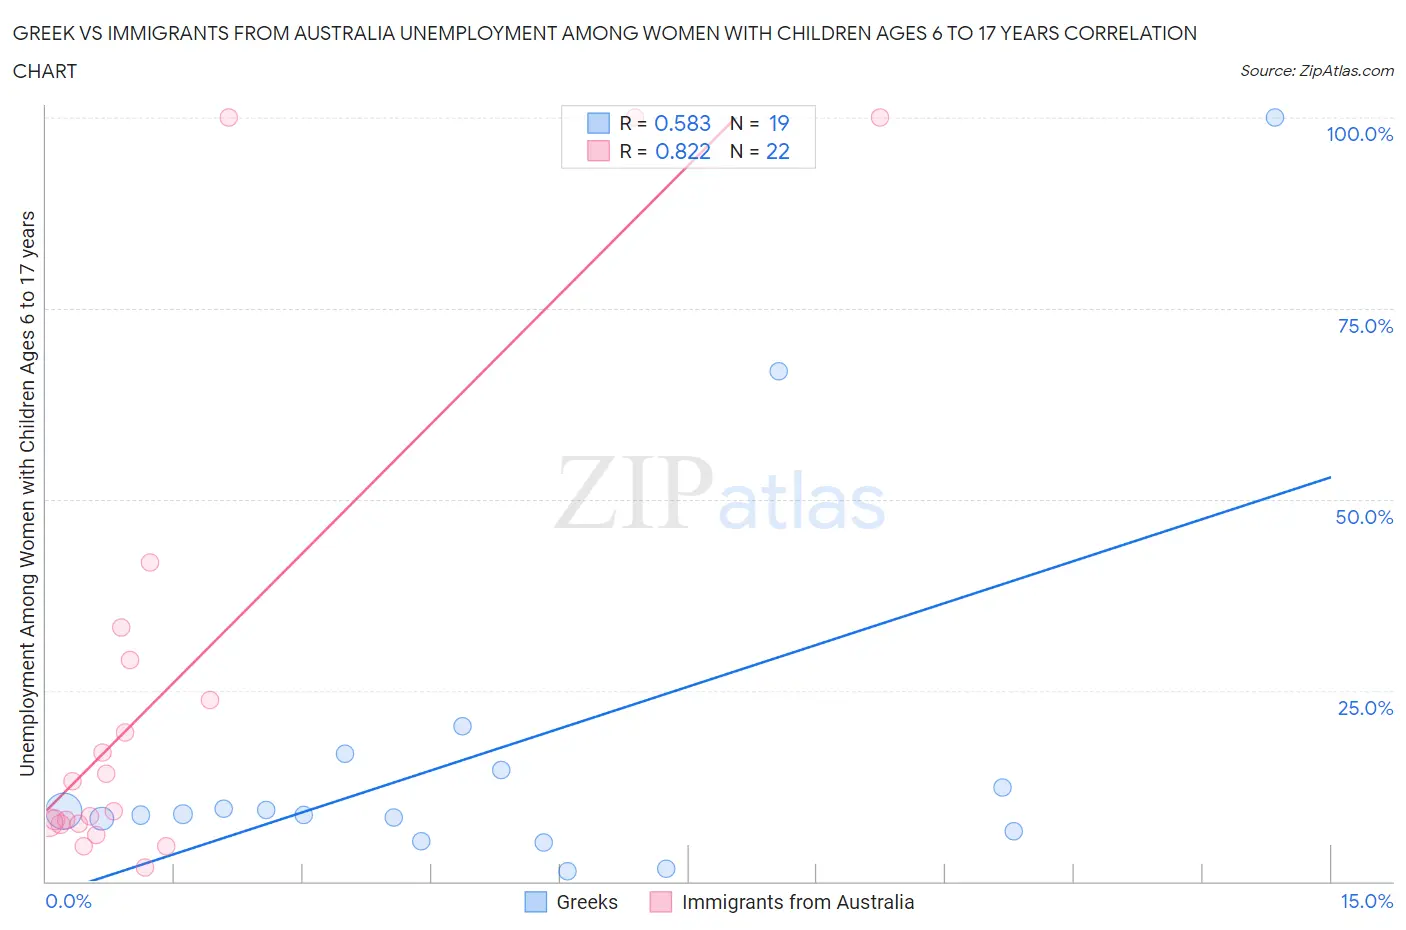 Greek vs Immigrants from Australia Unemployment Among Women with Children Ages 6 to 17 years